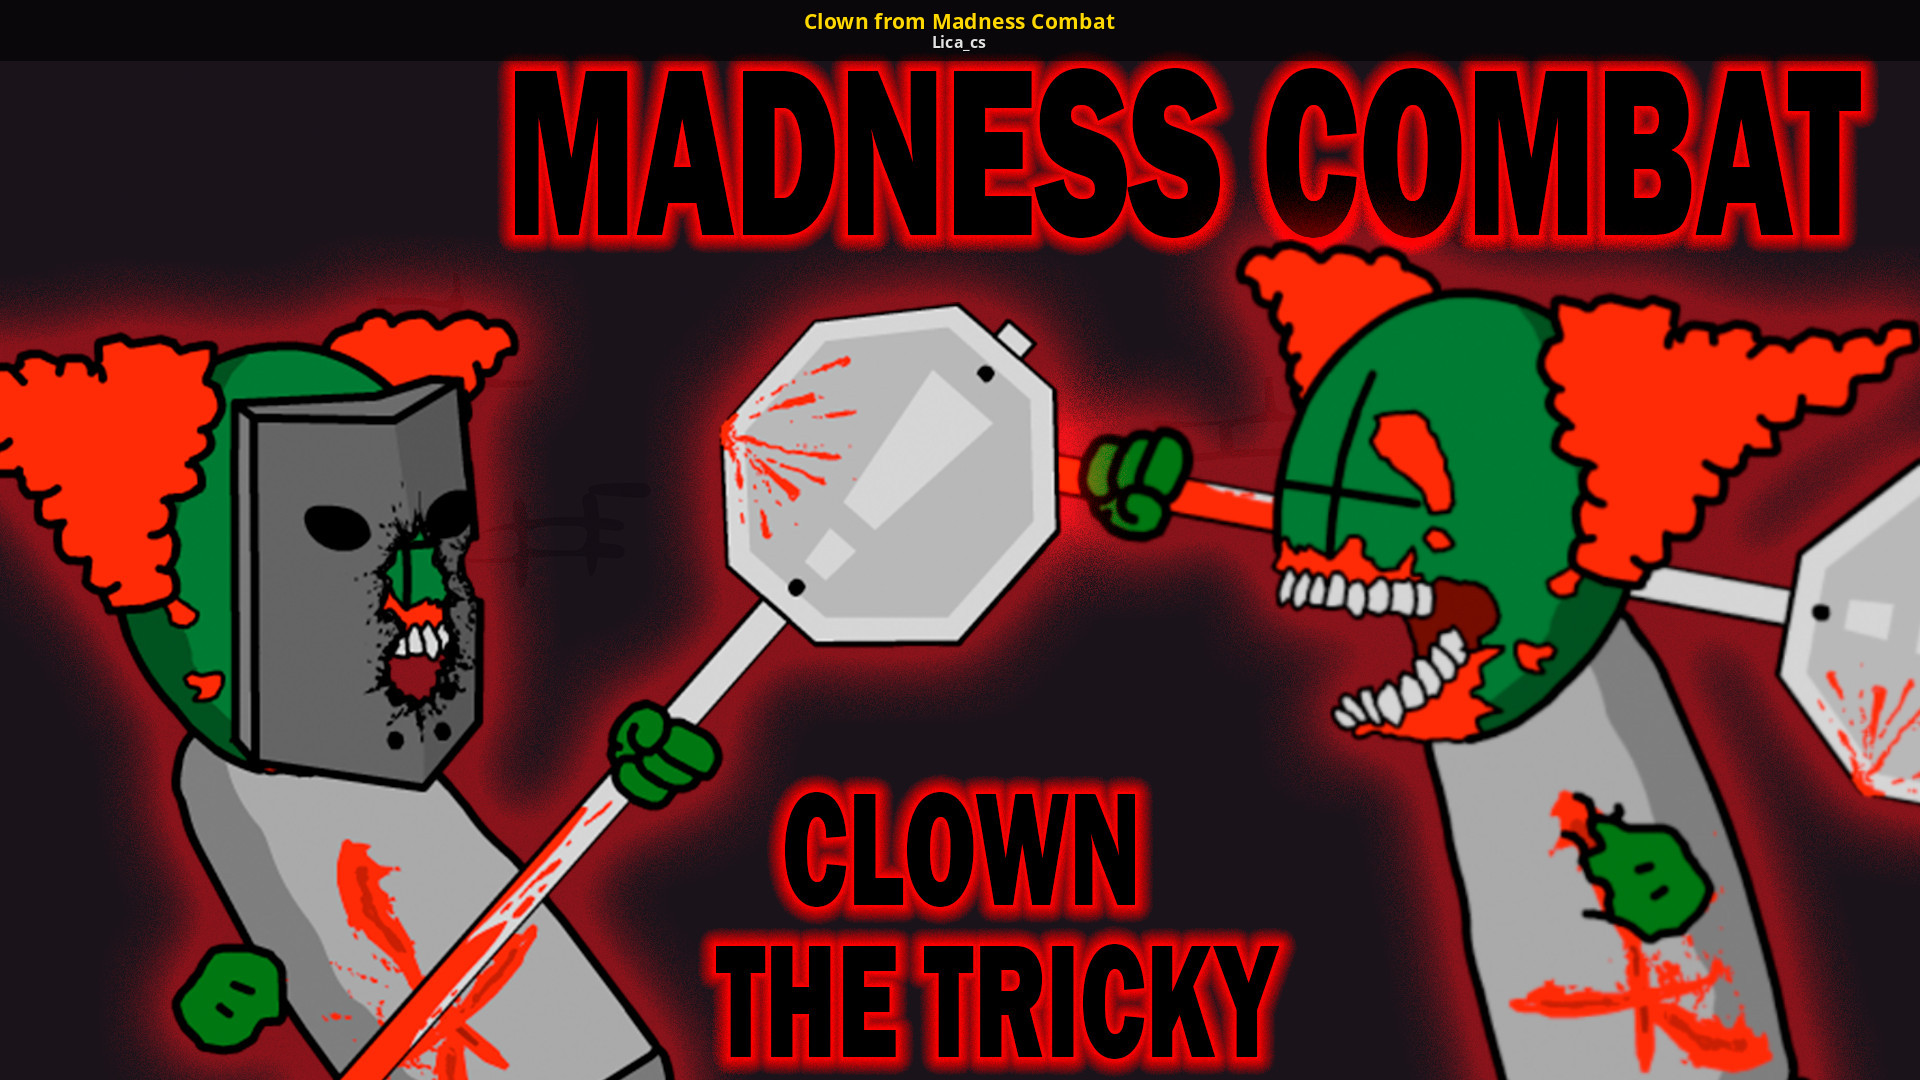 Tricky the clown from madness combat